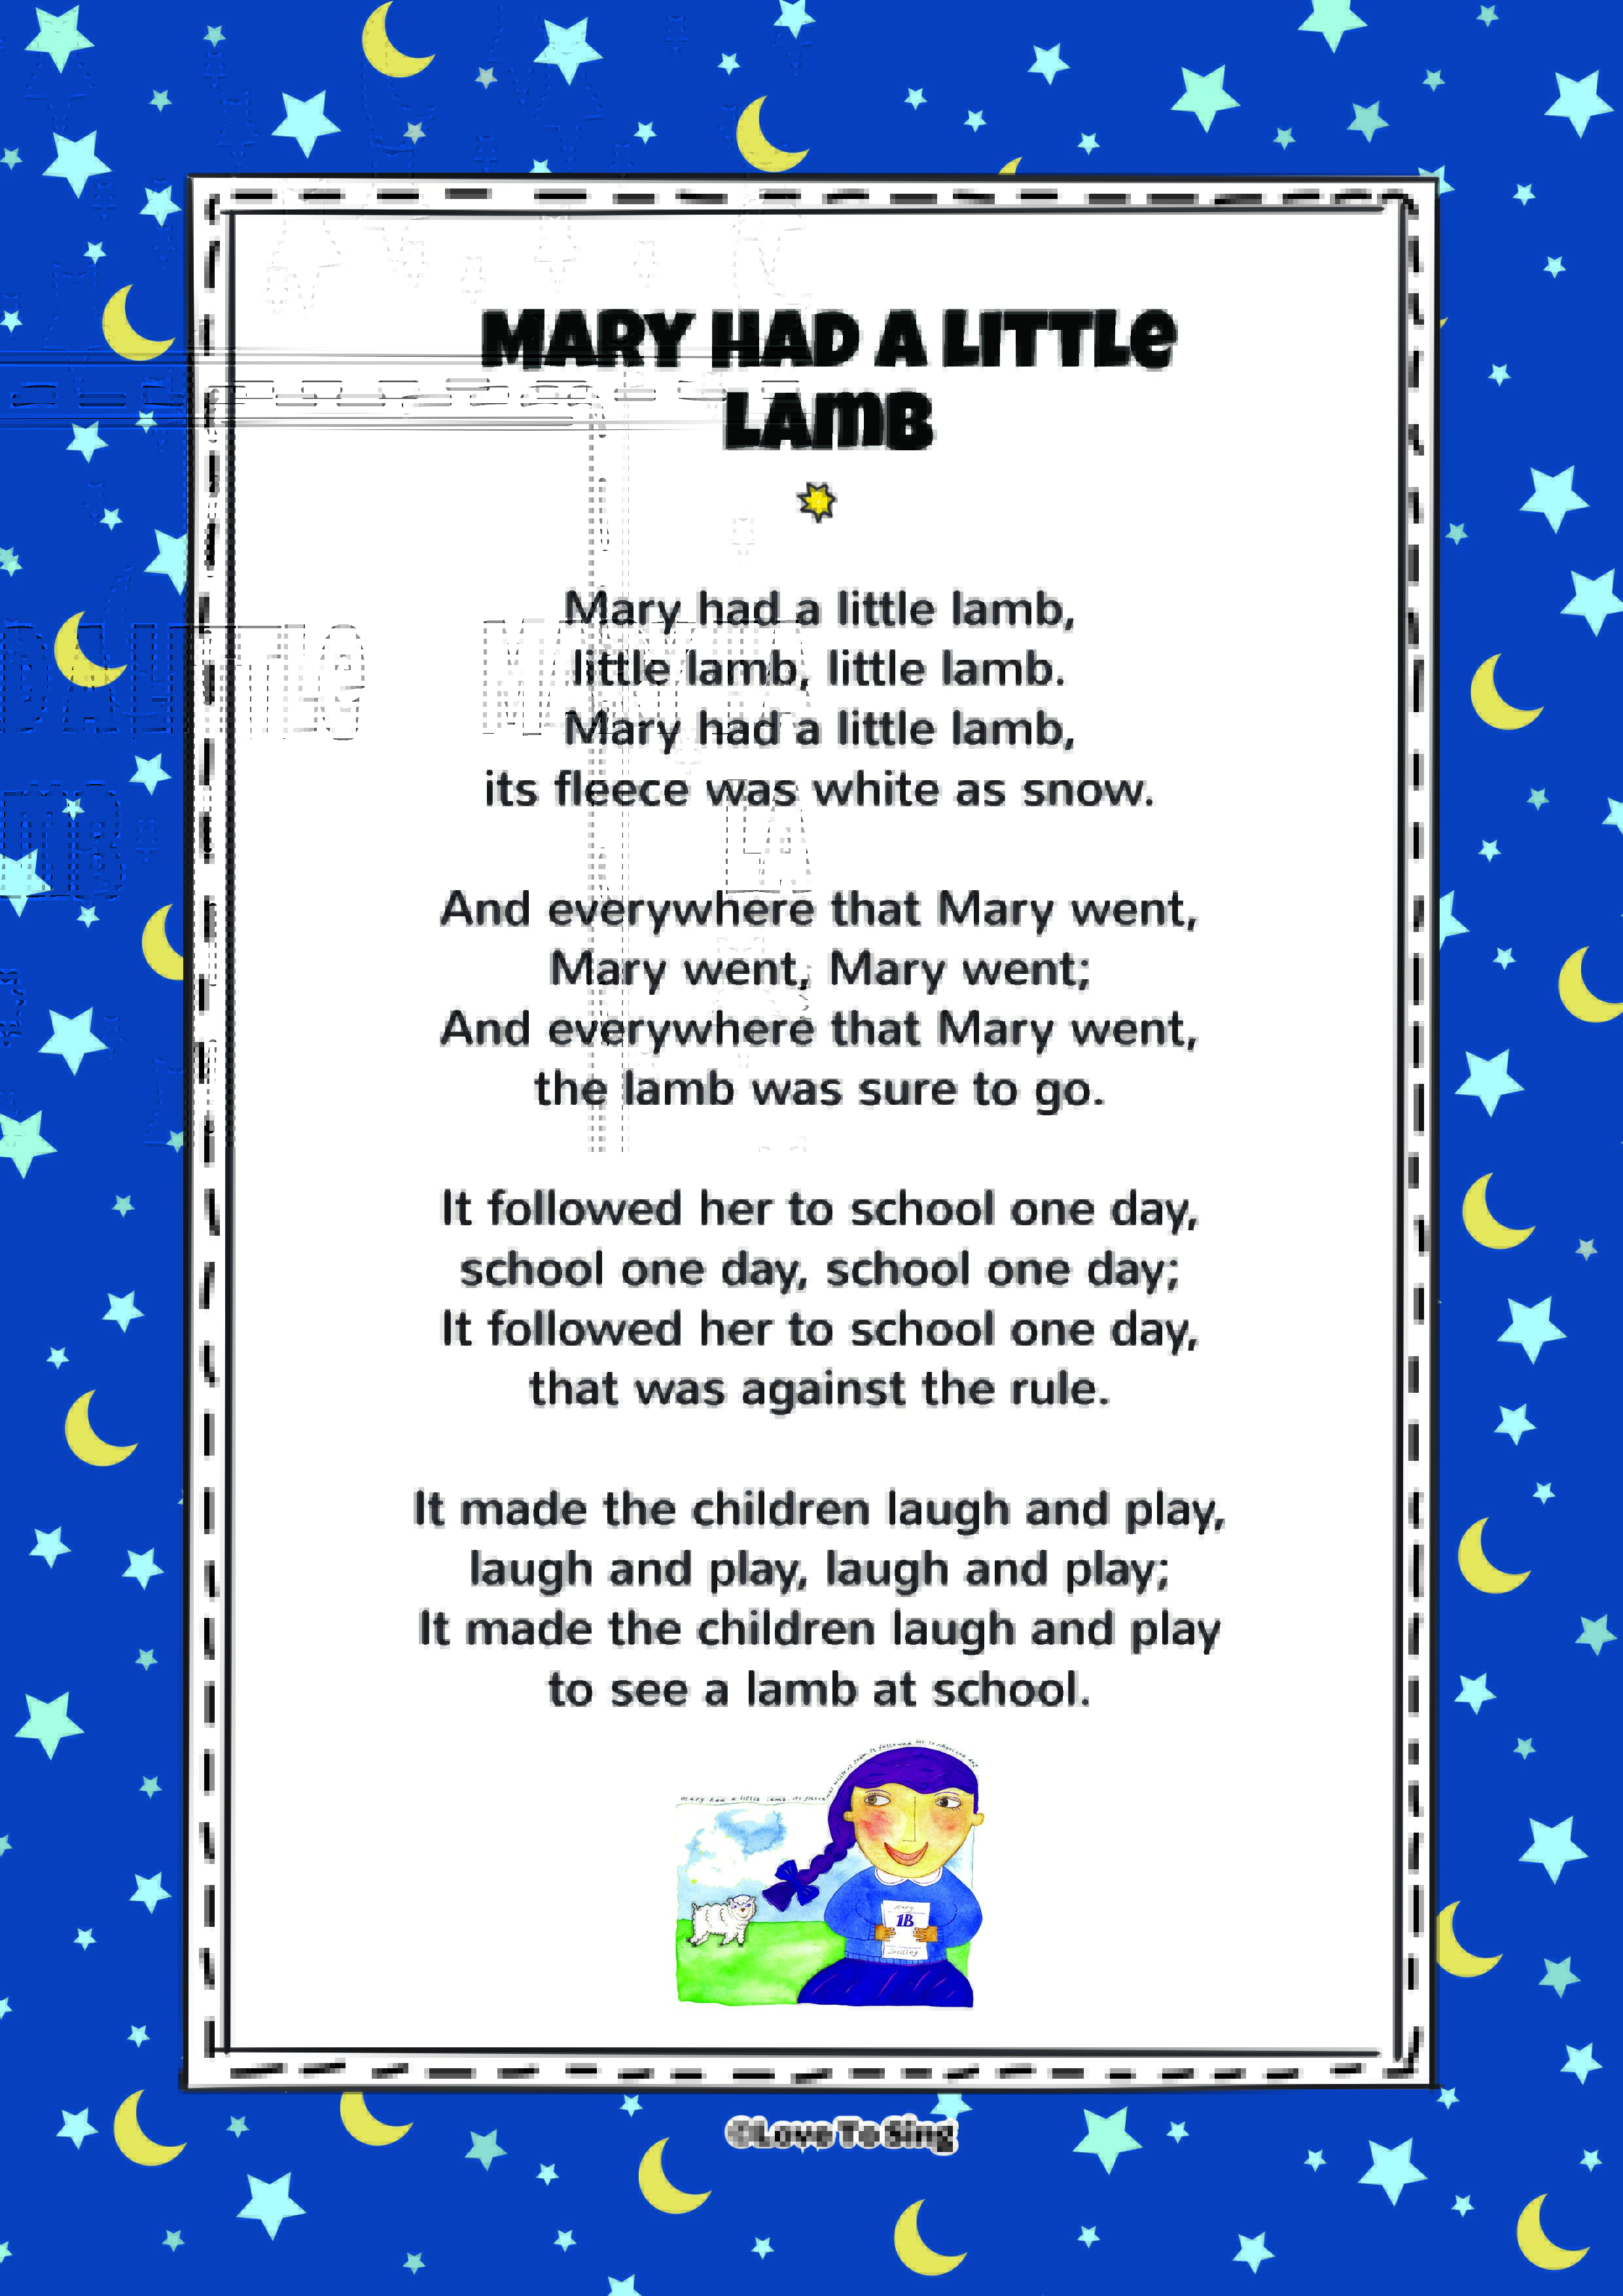 Mary Had a Little Lamb Rhyme FREE Kids Videos & Activities